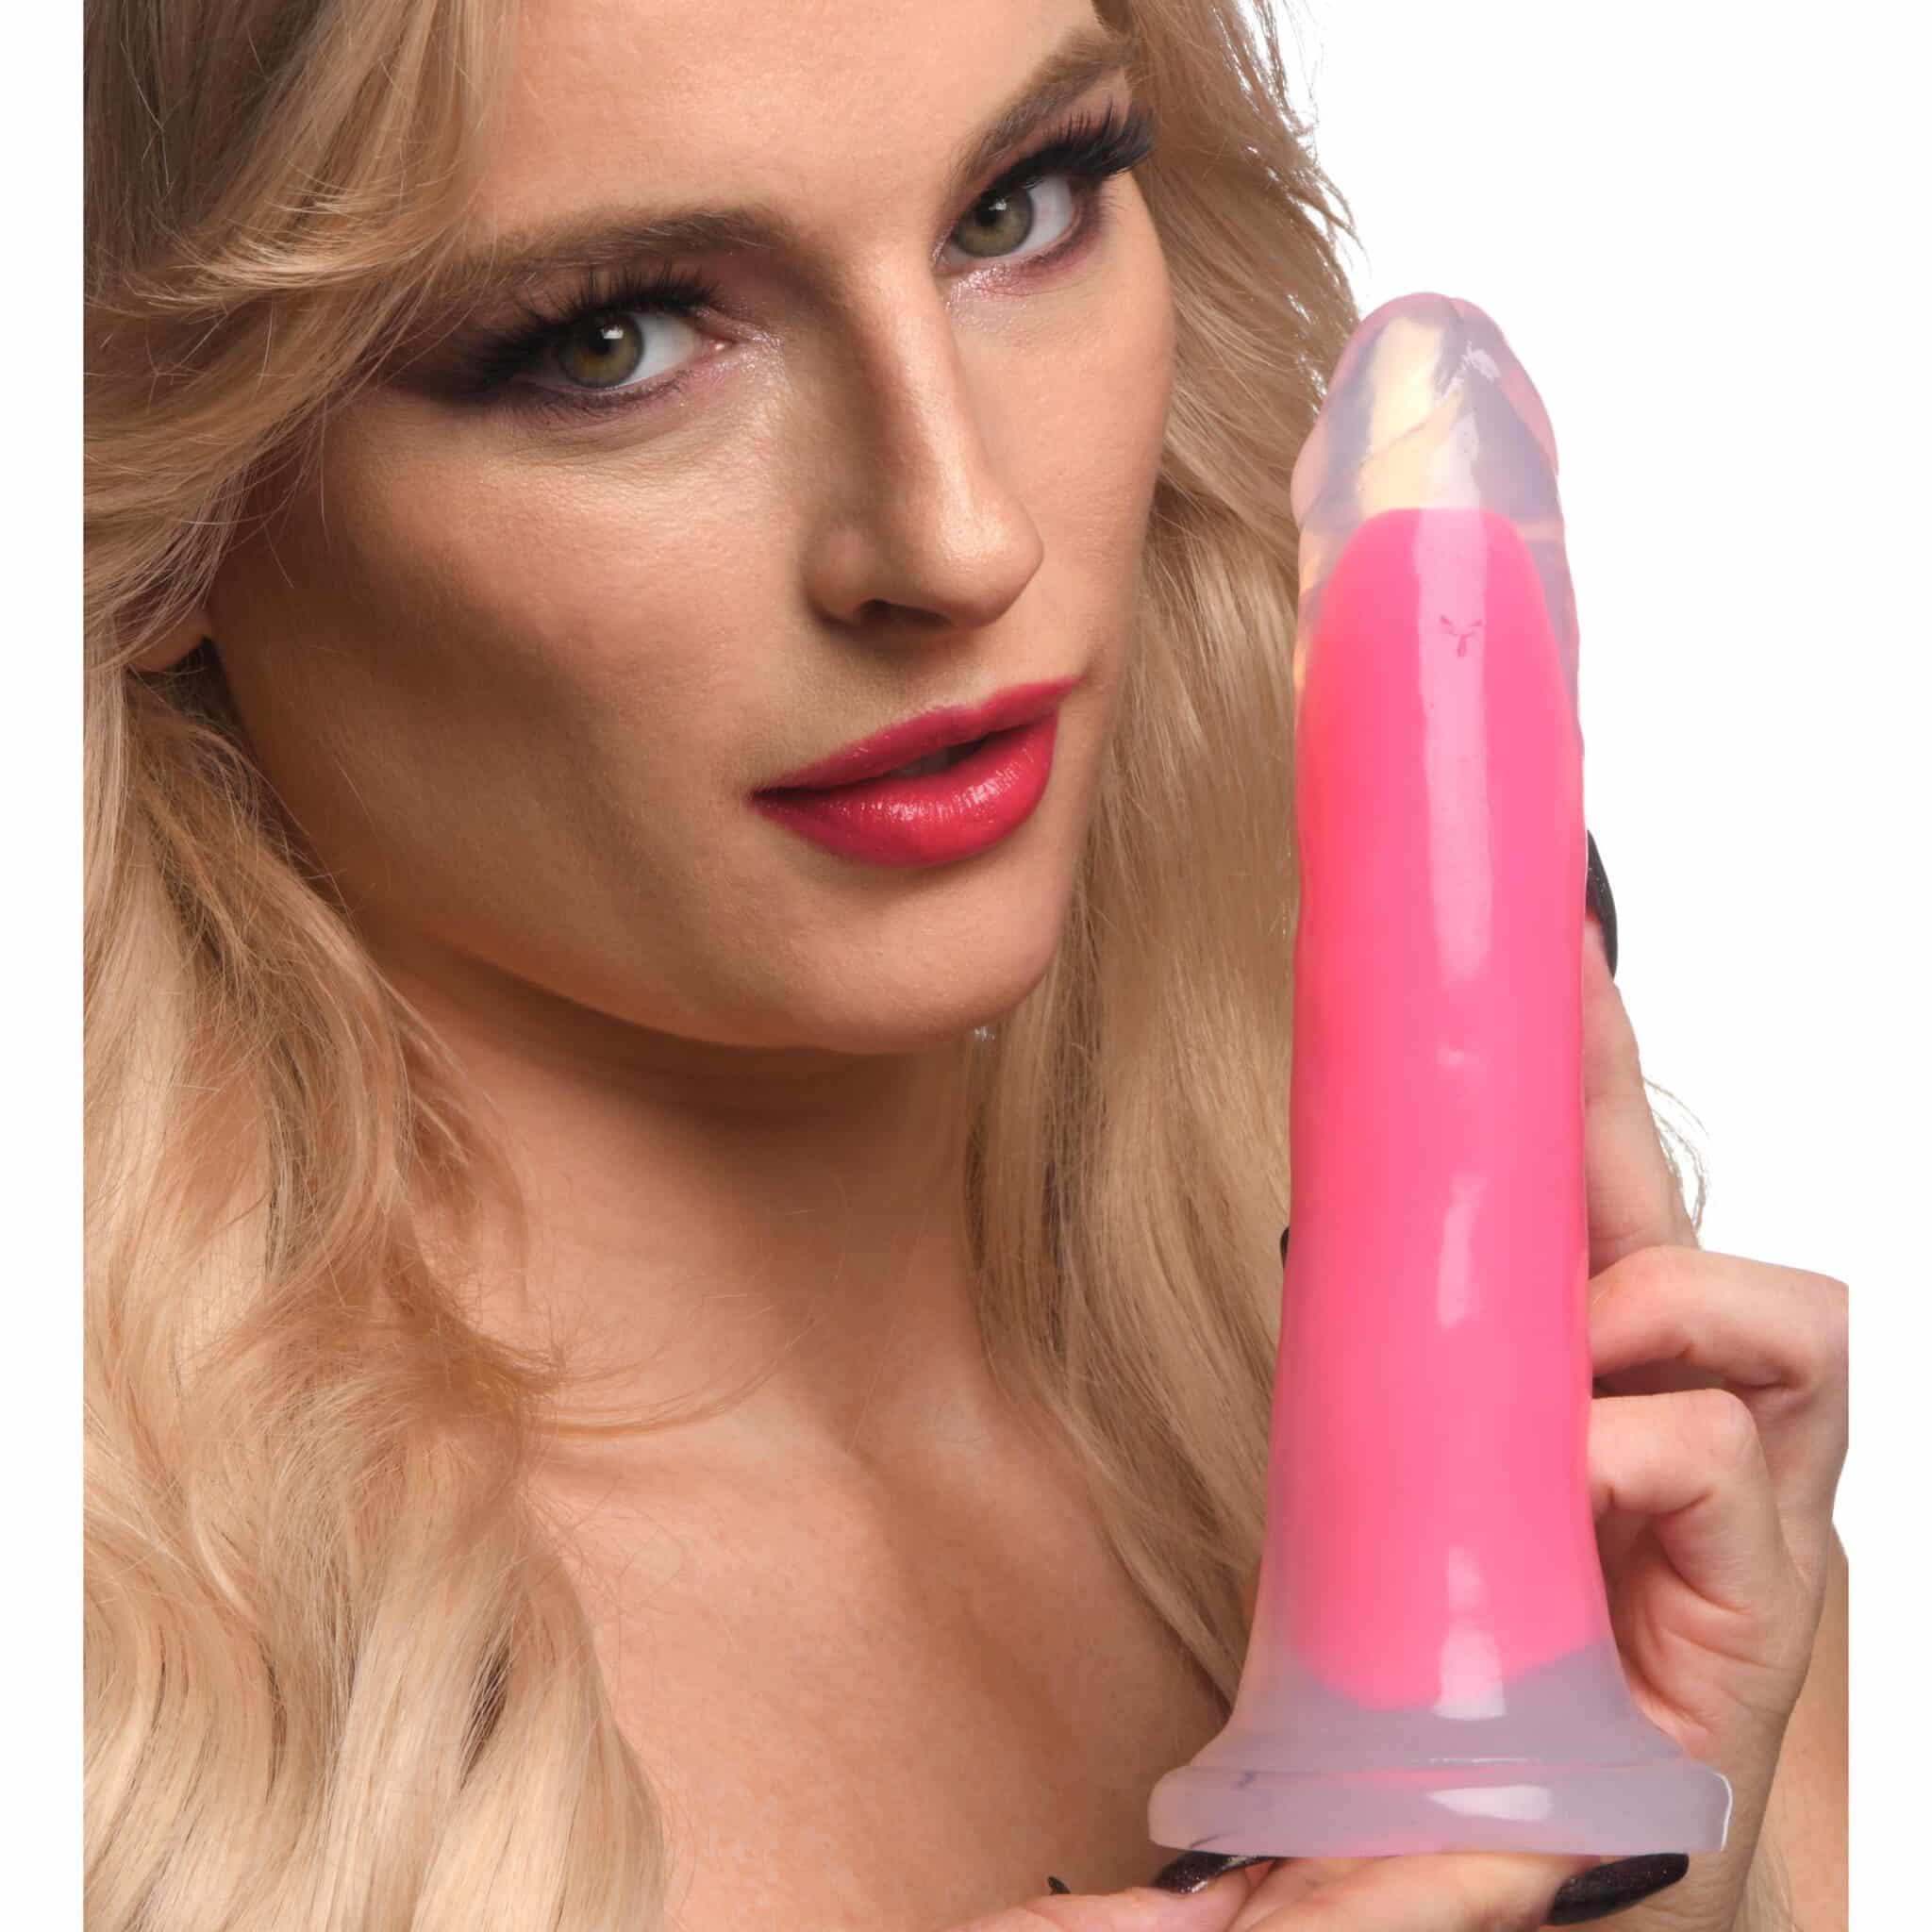 7 Inch Glow-in-the-Dark Silicone Dildo - Pink-2